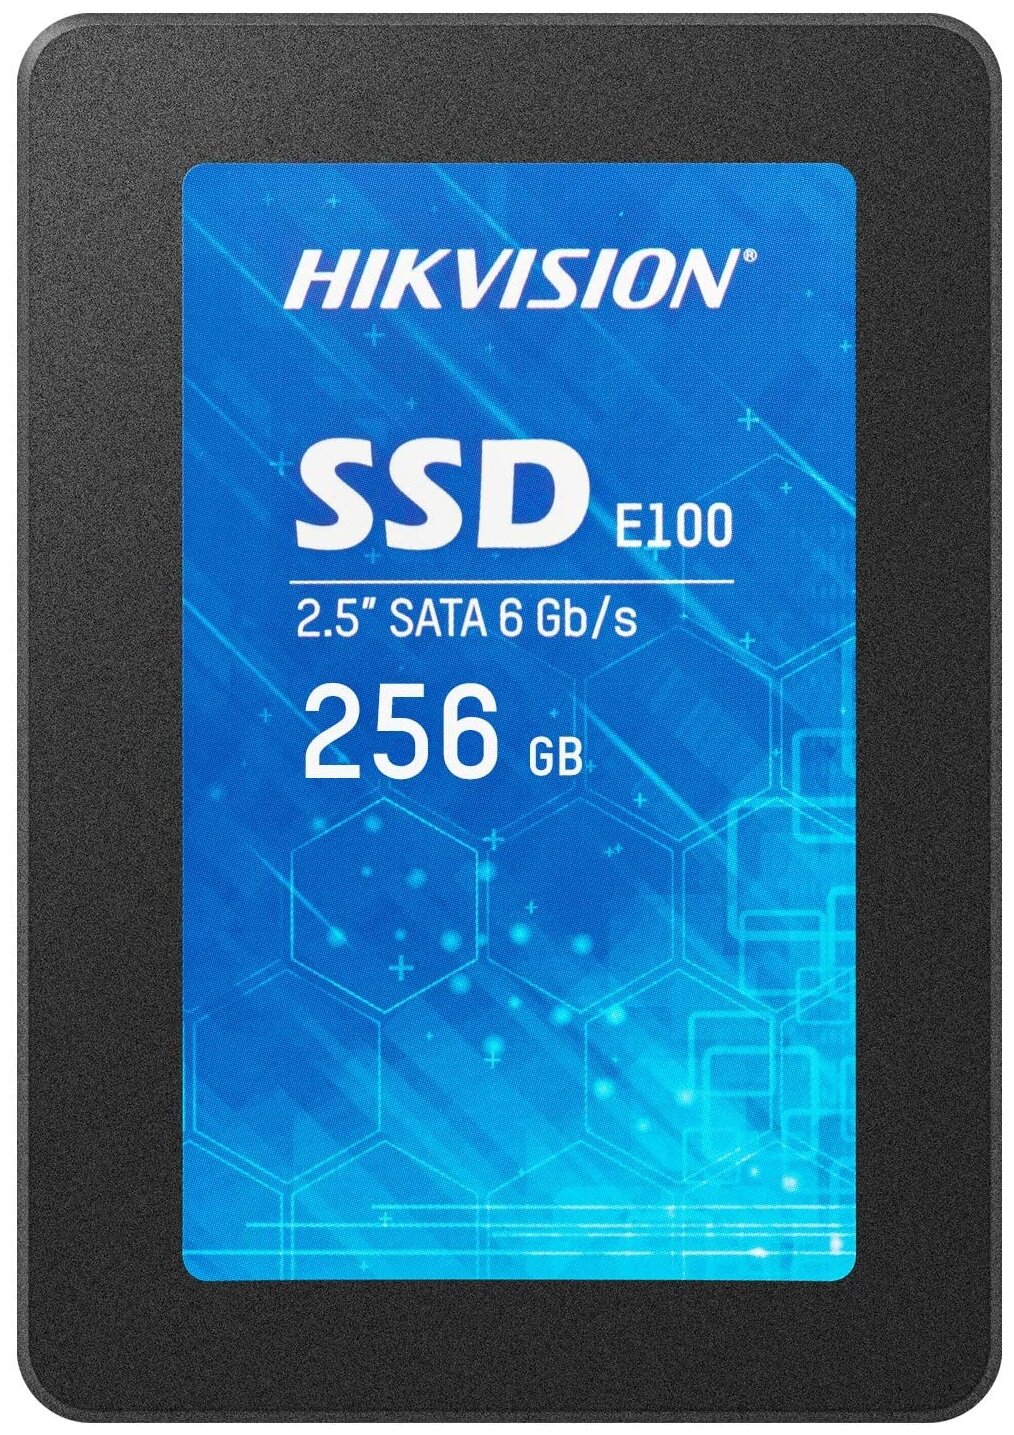 SSD 2.5" HIKVision 256GB E100 Series (SATA3, up to 550/450MBs, 3D TLC, 120TBW)